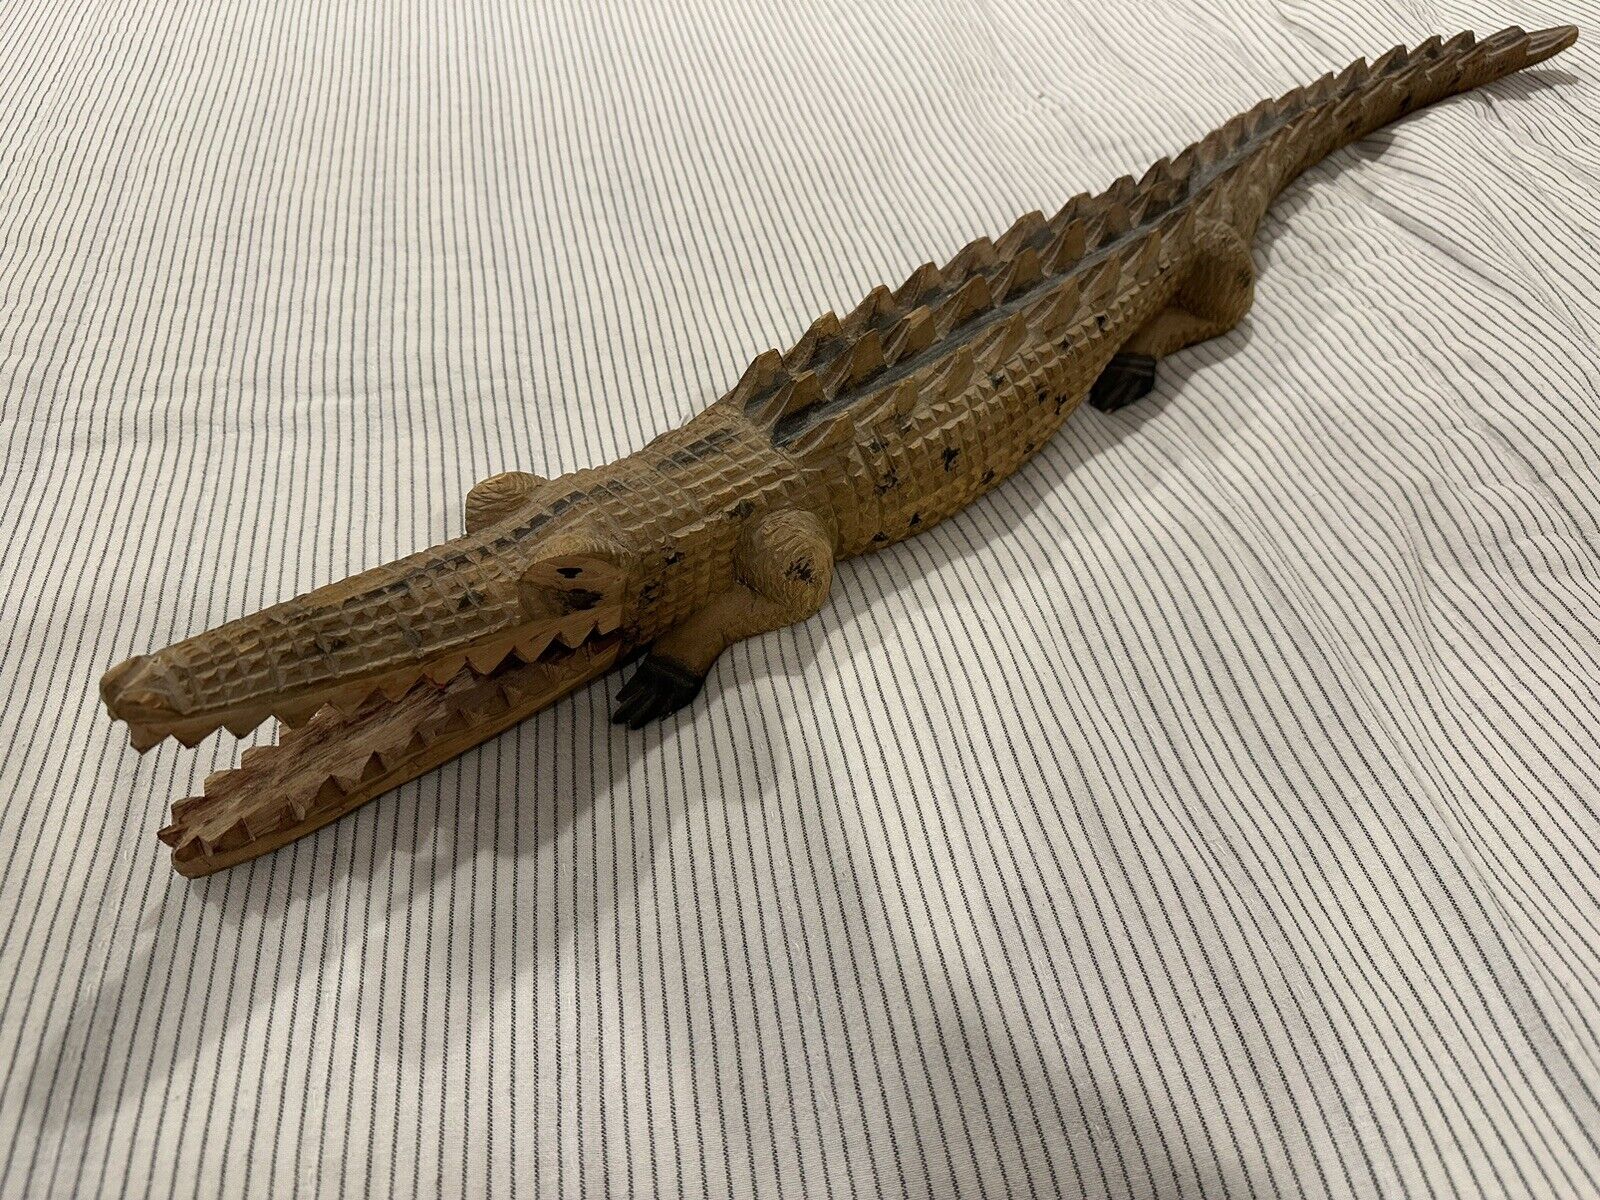 ALLIGATOR CROCODILE Carved Wood Wooden Hand Made One Of A Kind 39” Long